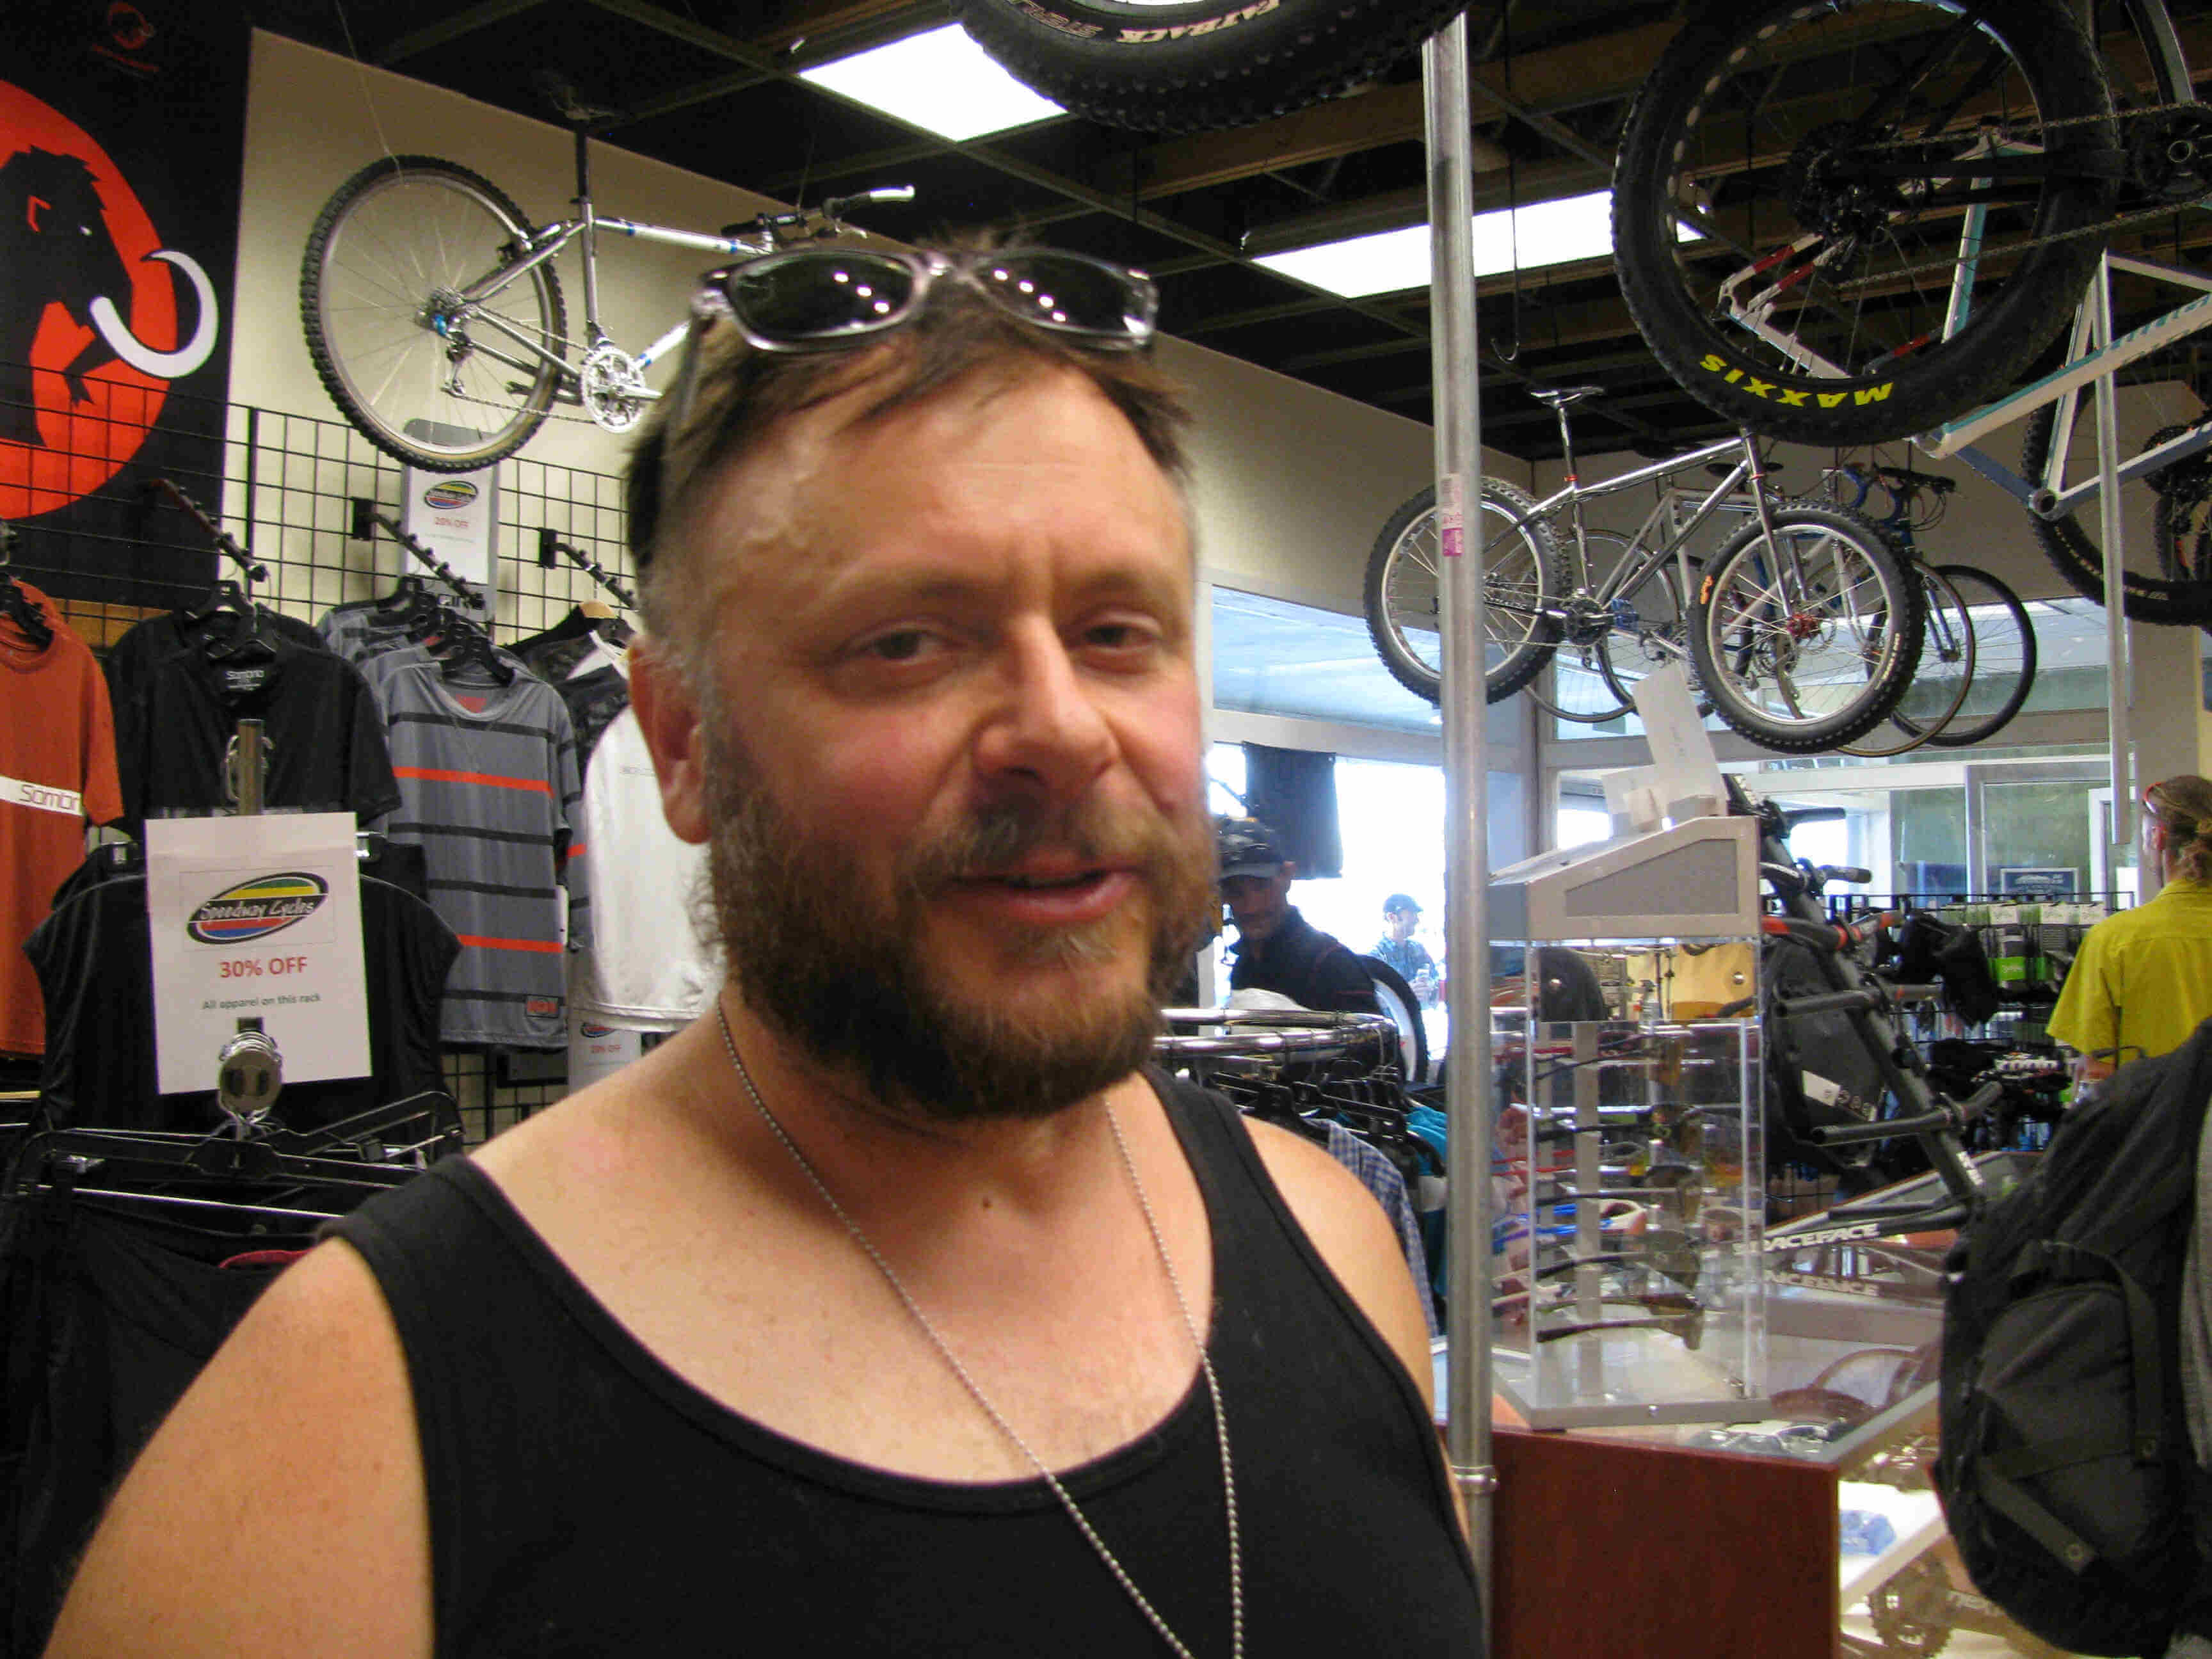 Headshot of a person with a beard and sunglasses on top of their head, standing inside of a bike shop